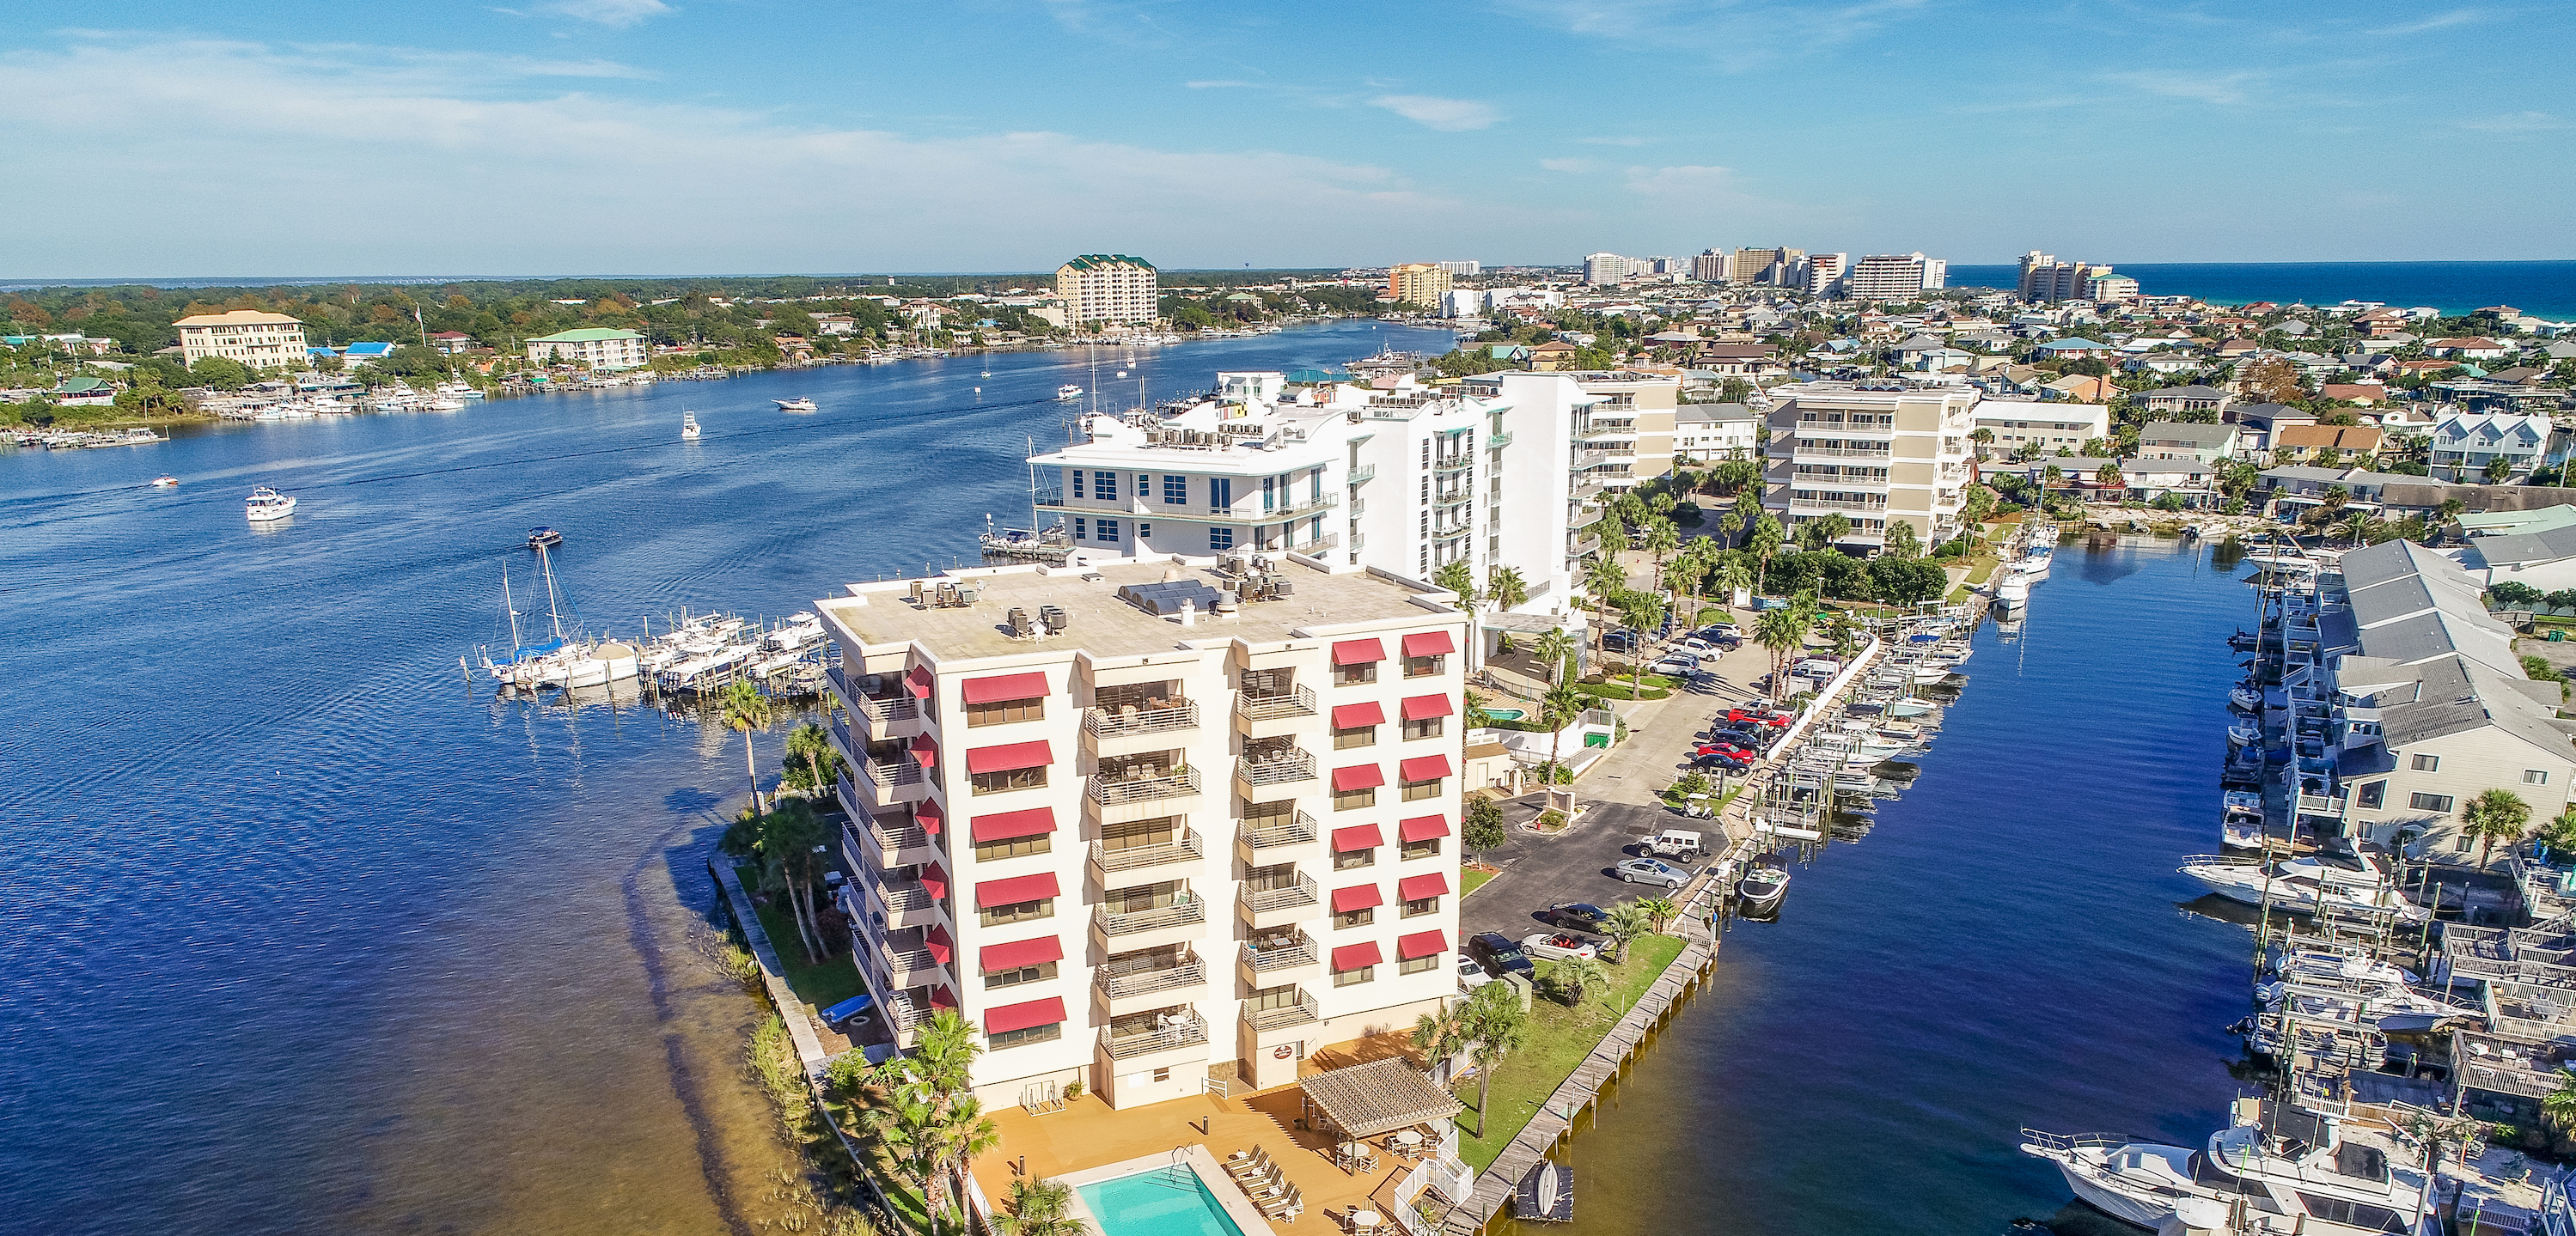 An aerial view of some of the condos along the harbor in Destin